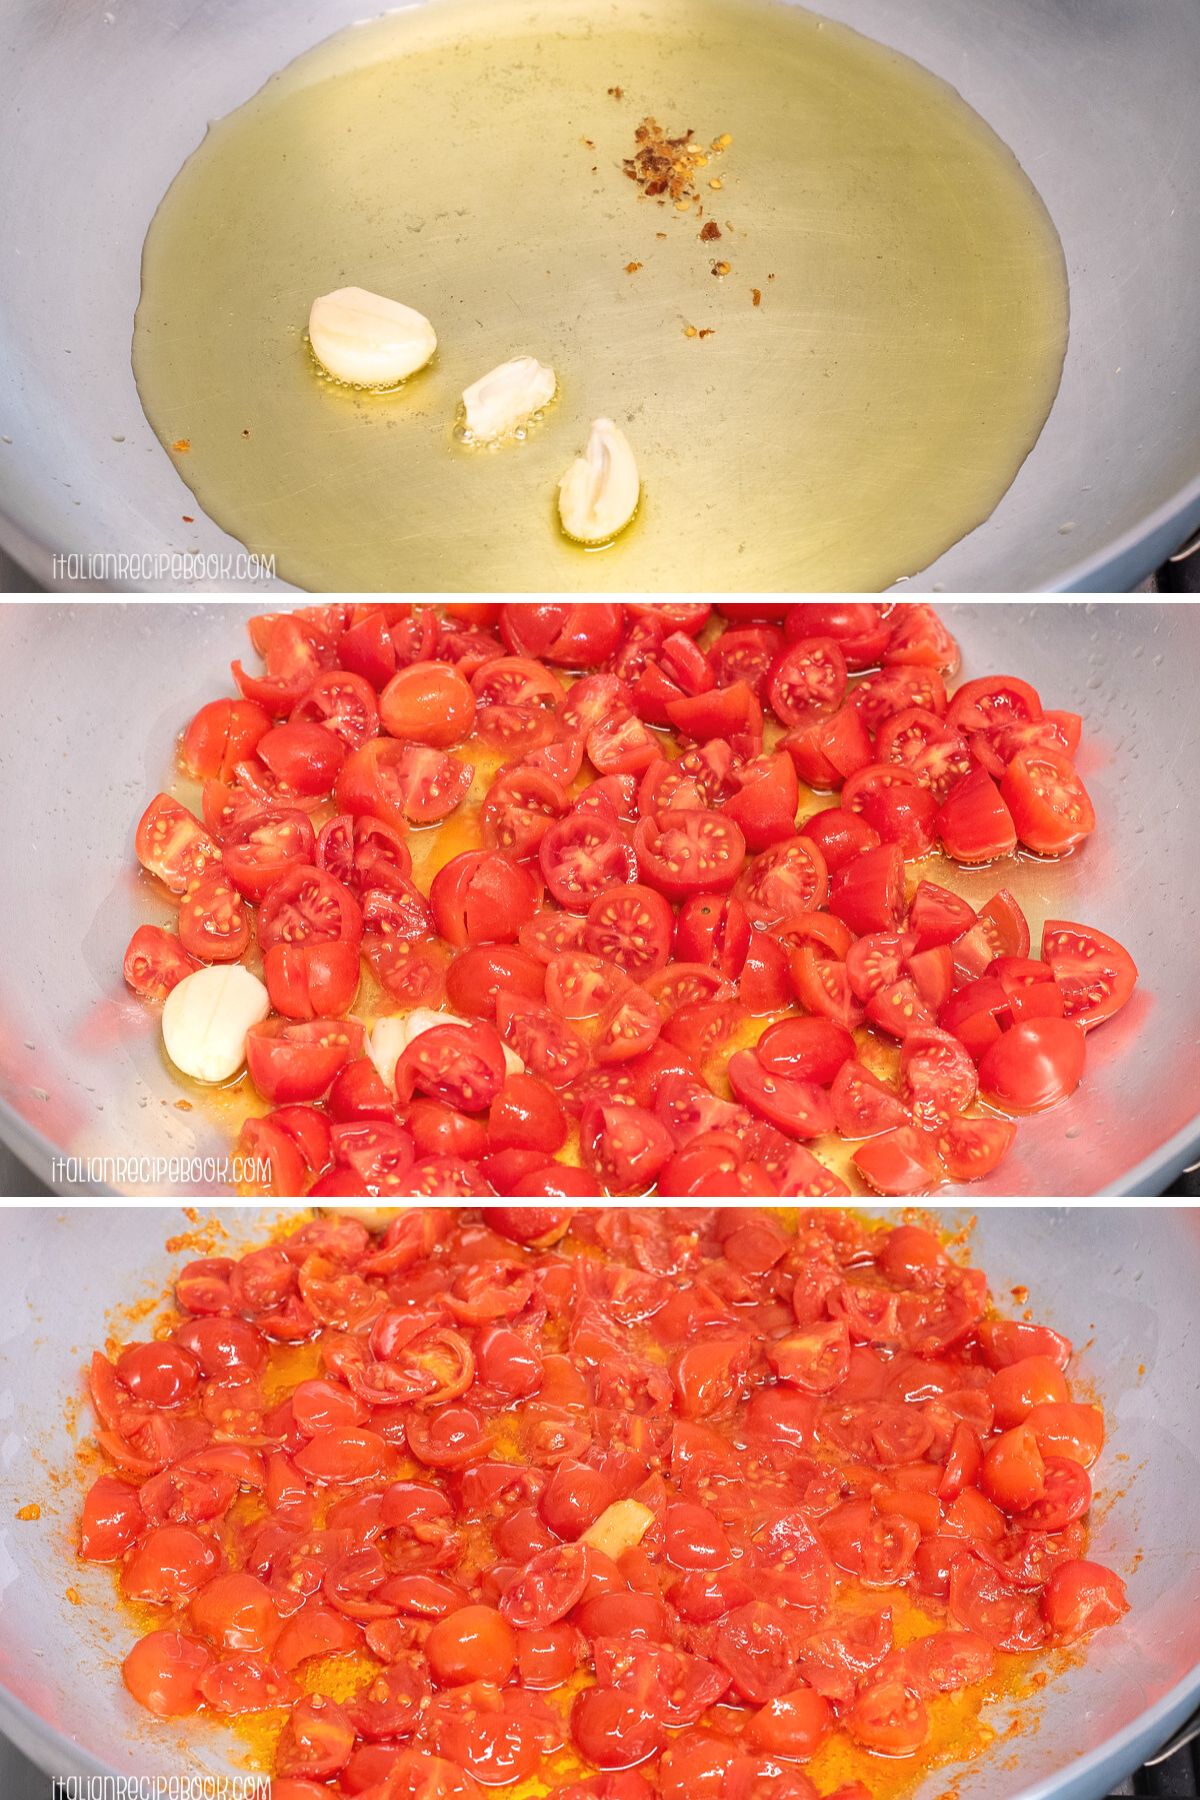 preparing the tomato base for the sauce - step 1